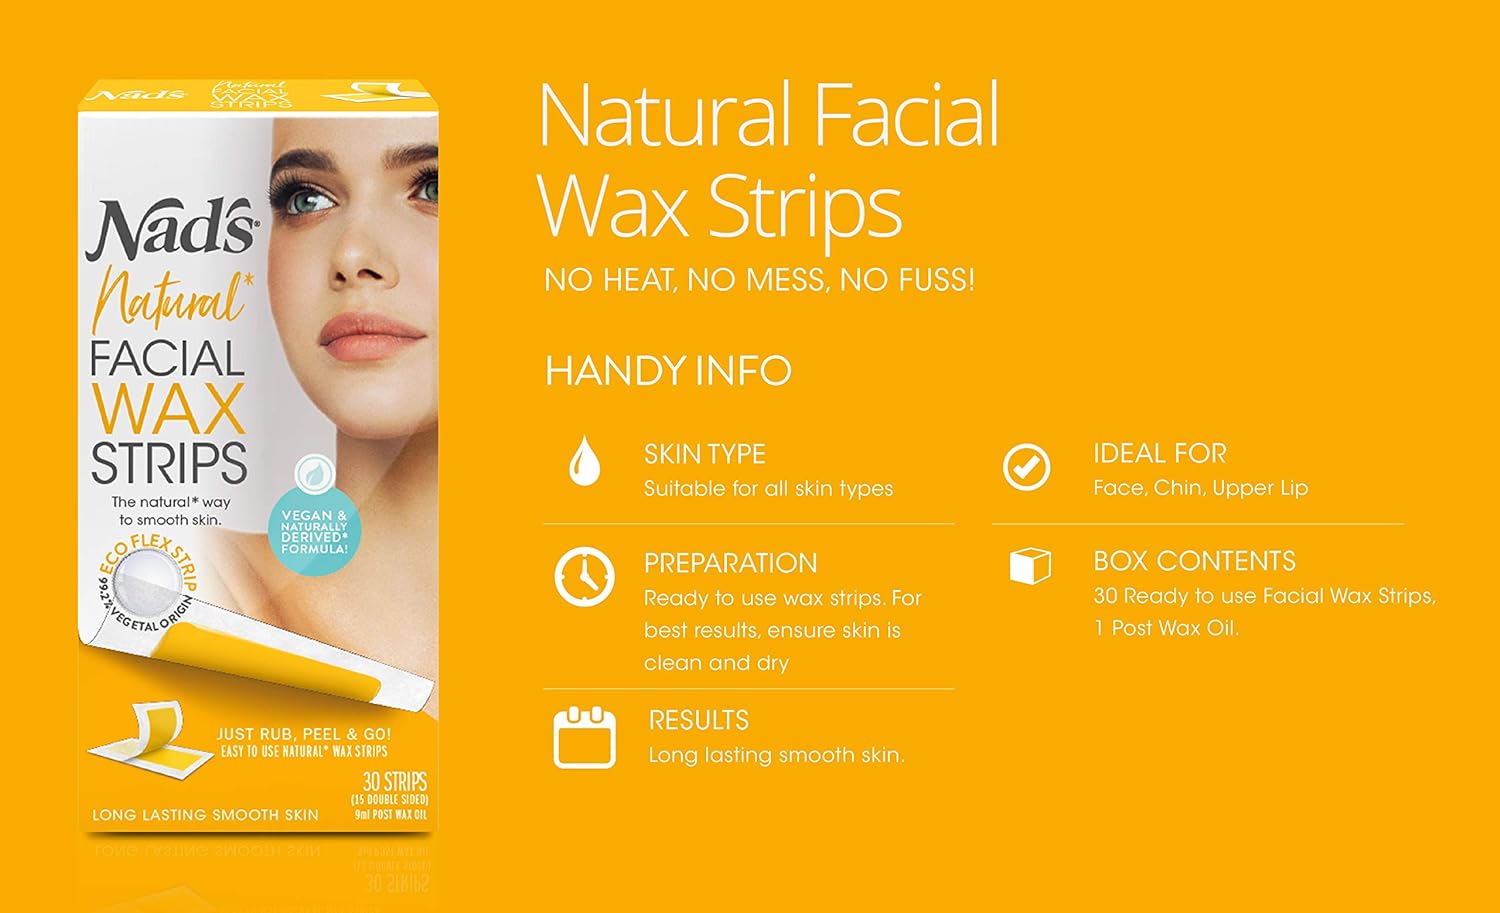 Buy Nad's Facial Wax Strips - Natural All Skin Types - Waxing Kit With 30 Face Wax Strips & Post Wax Oil, 1 Count on Amazon.com ? FREE SHIPPING on qualified orders